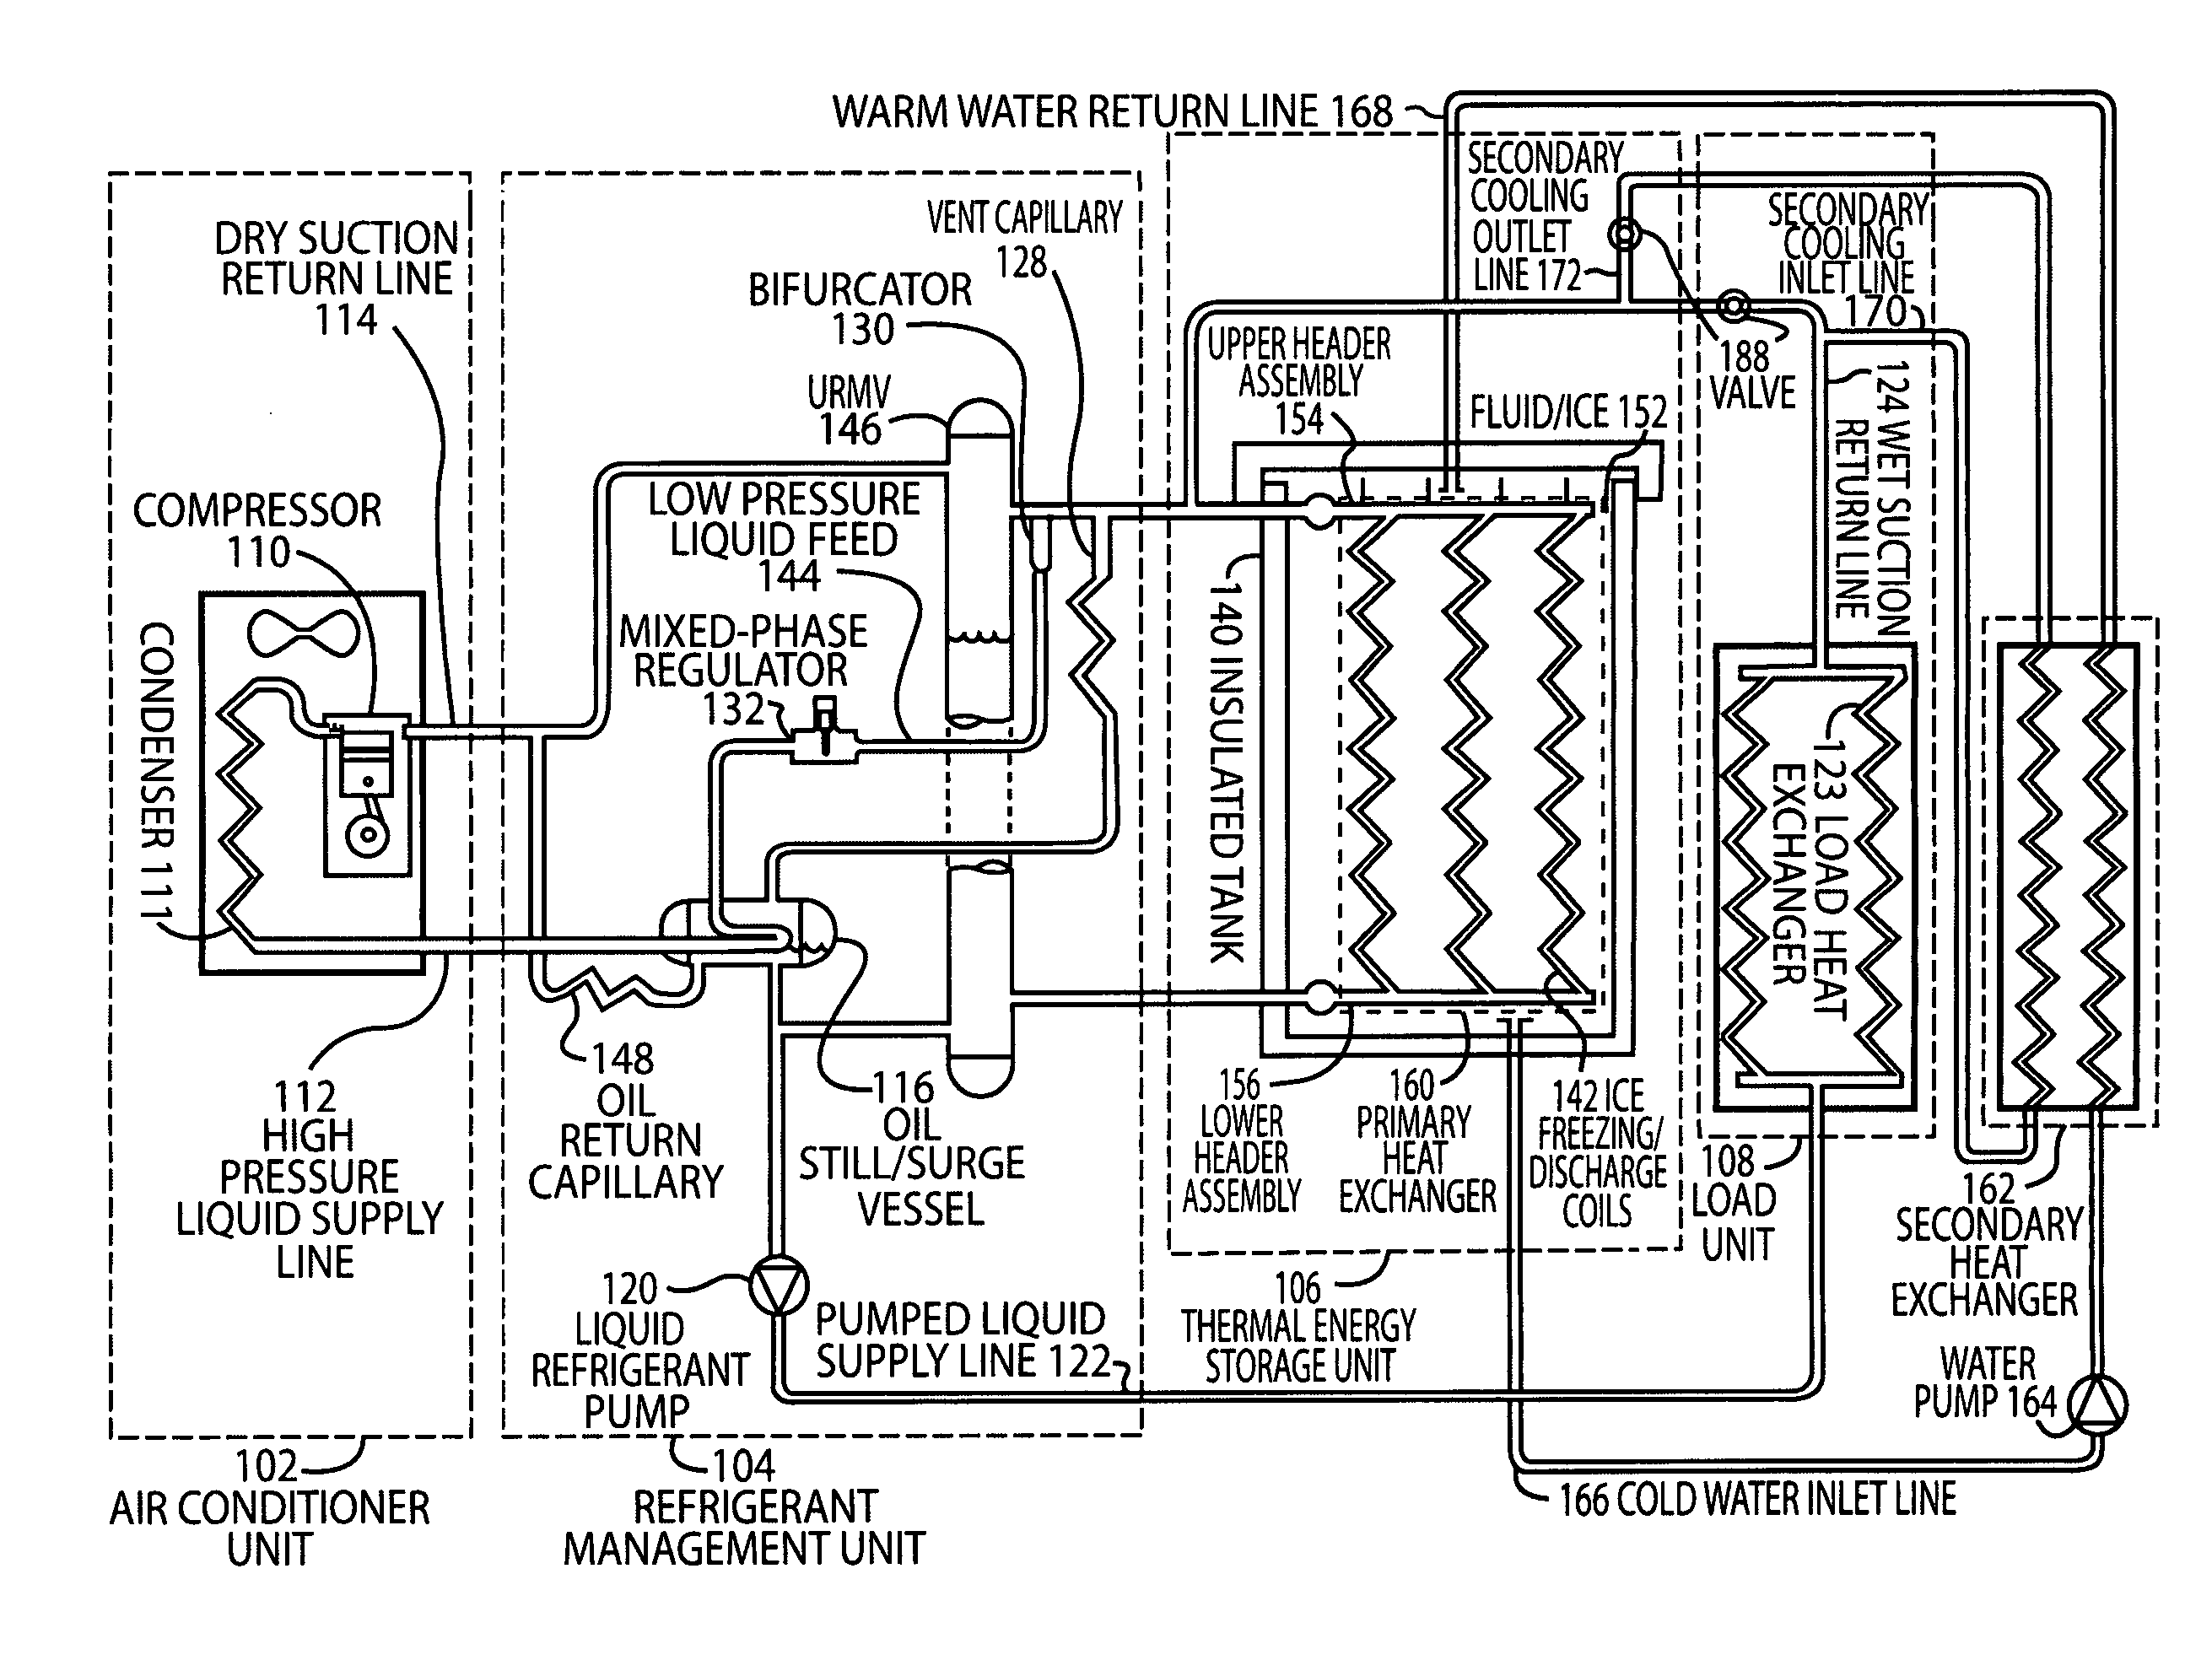 Refrigerant-based thermal energy storage and cooling system with enhanced heat exchange capability